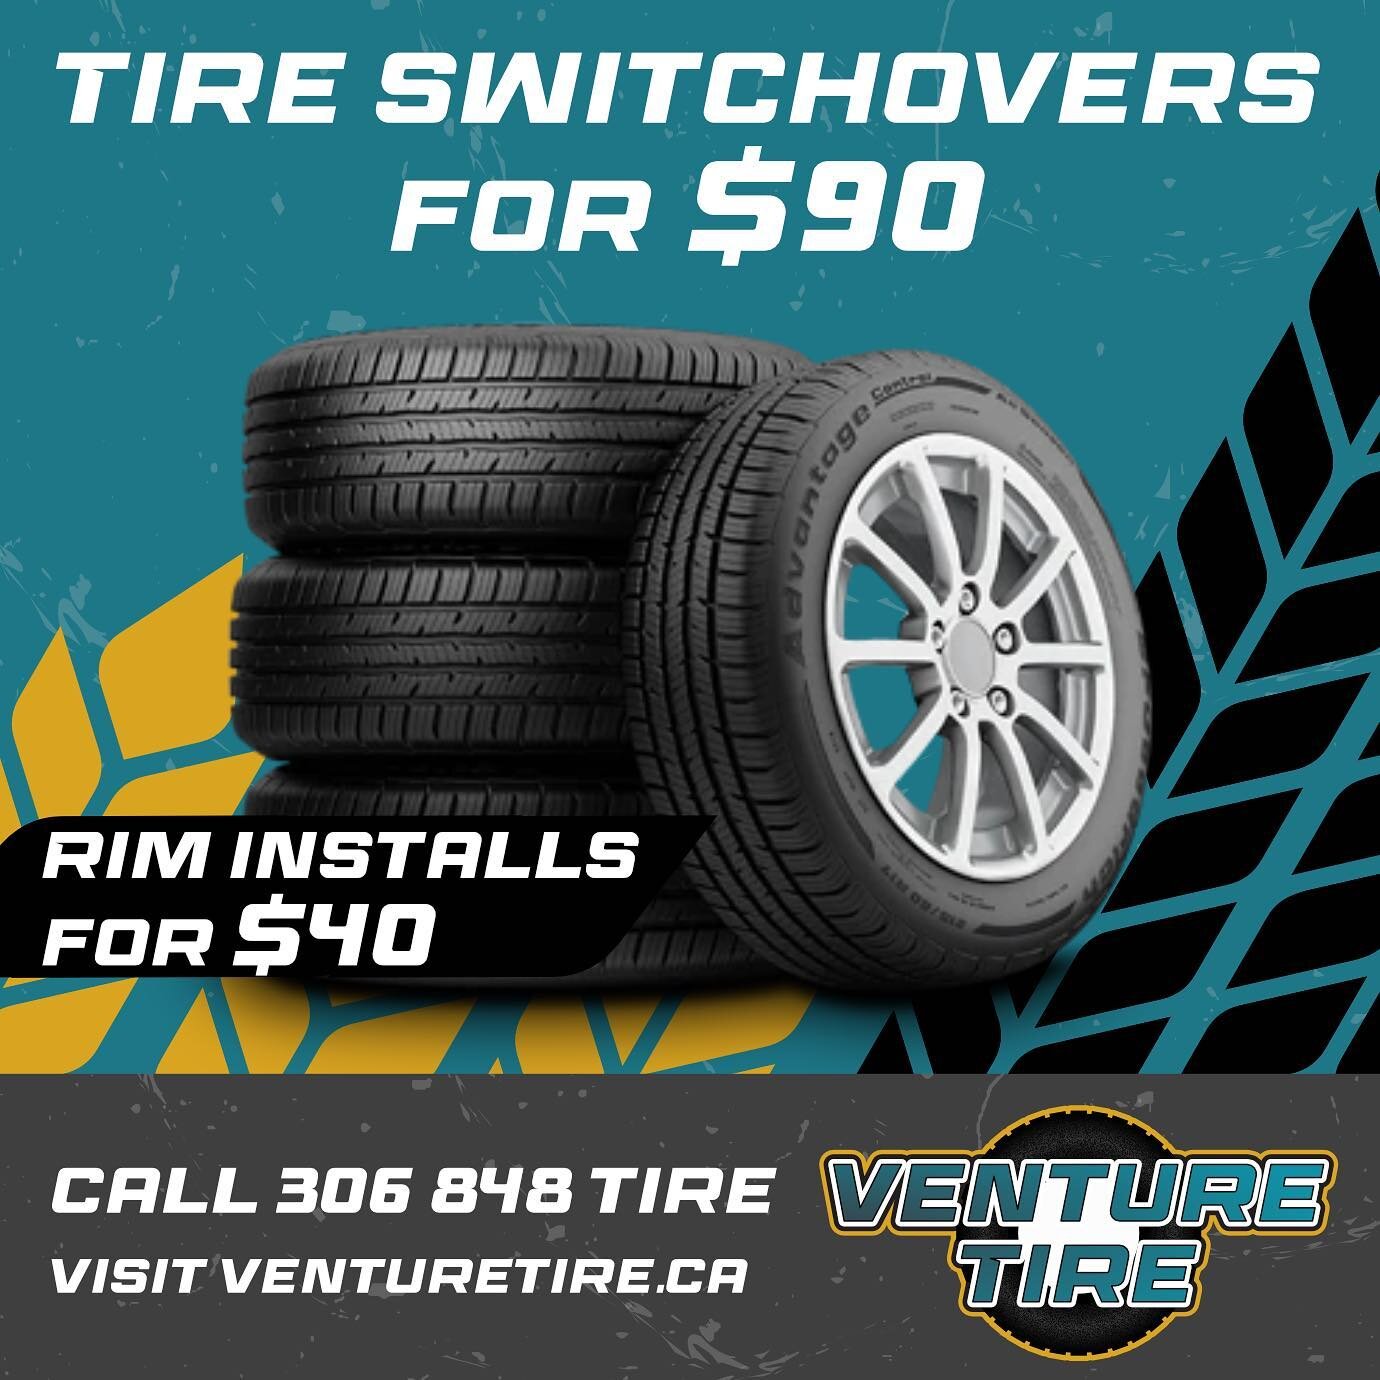 Happy first day of spring! There&rsquo;s still some snow out there but it won&rsquo;t be here much longer. 🌱🌿Book your seasonal switchovers this spring with Venture Tire and save!